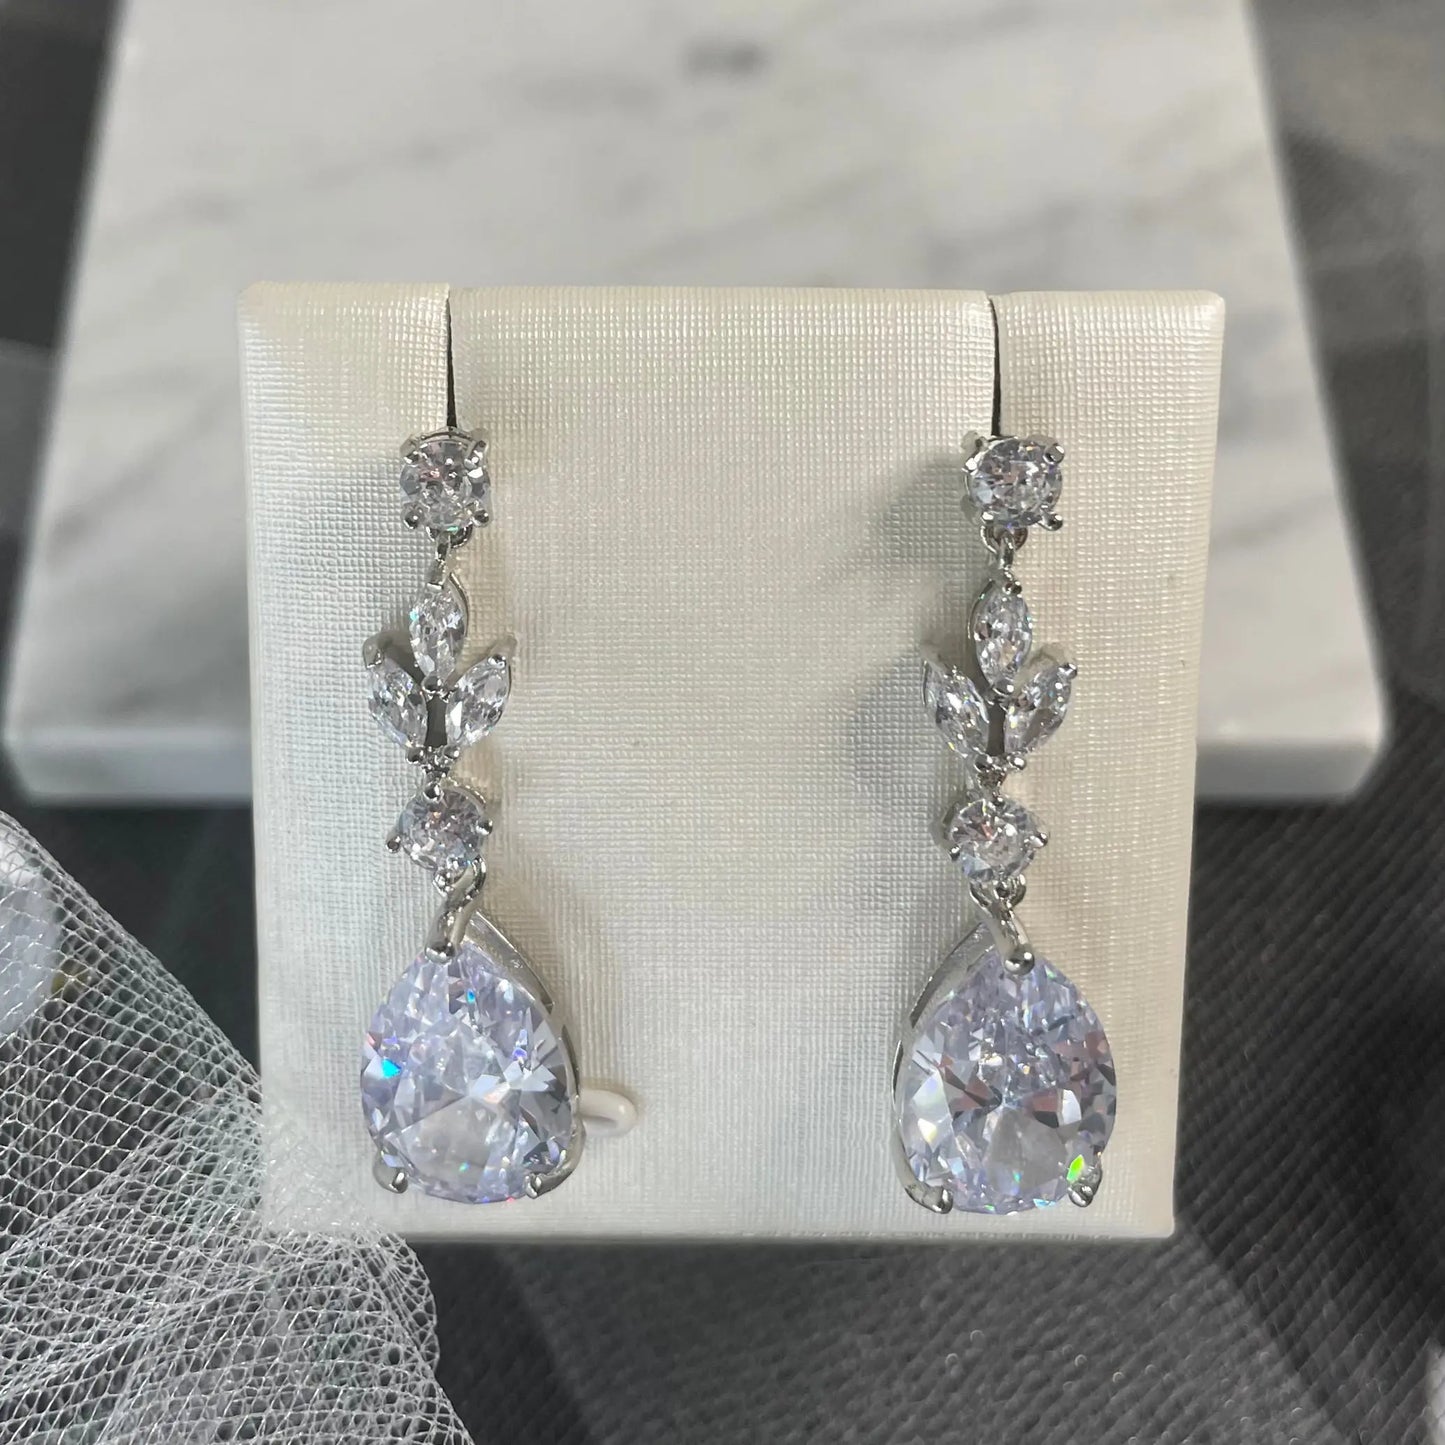 Hana Water Drop Bridal Wedding Earrings: A pair of elegant water drop bridal wedding earrings, featuring AAA zircon stones and available in white gold, gold, and rose gold plating.